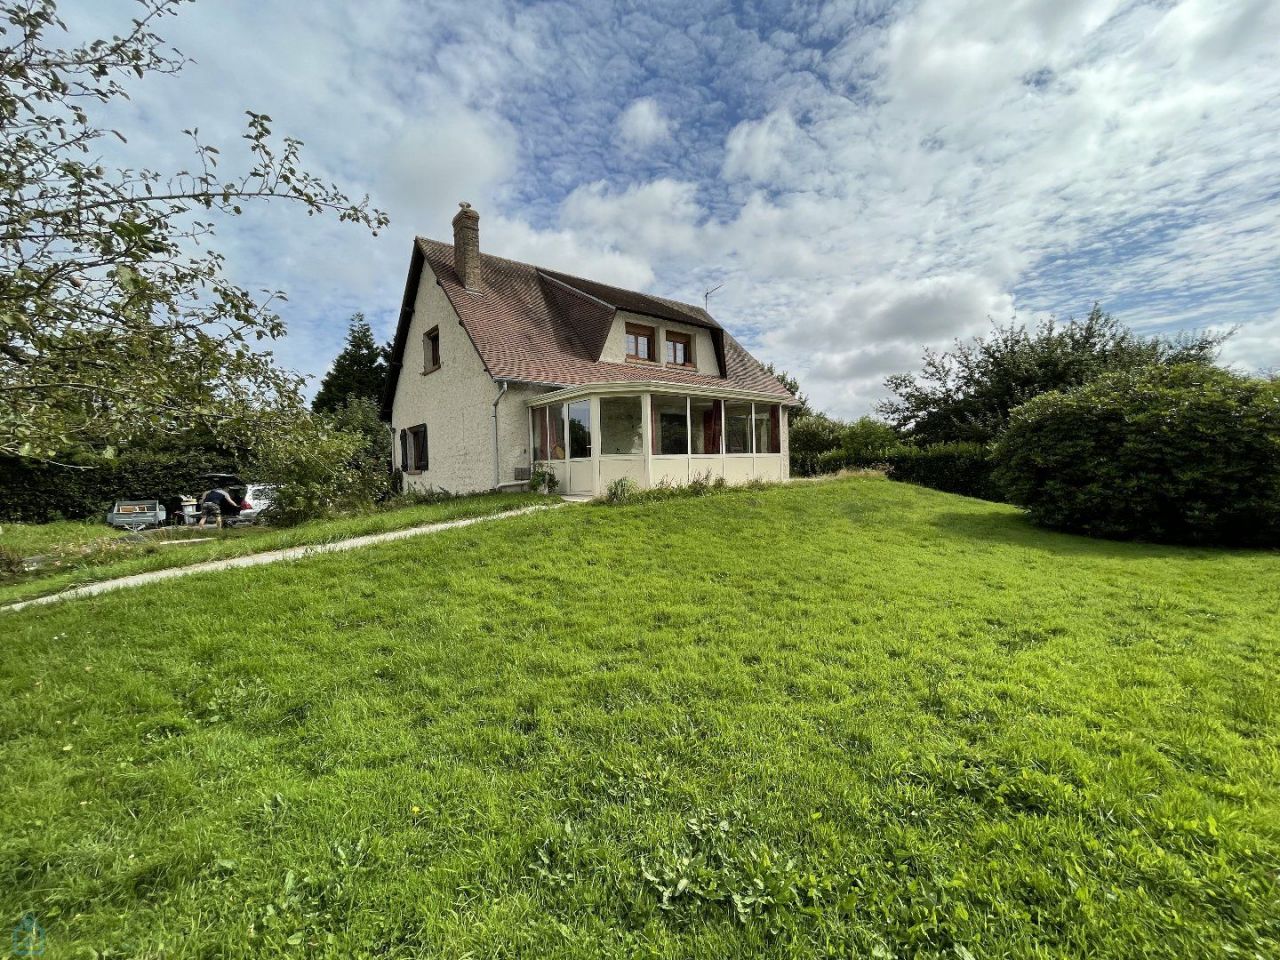 House in Normandie, France - picture 1